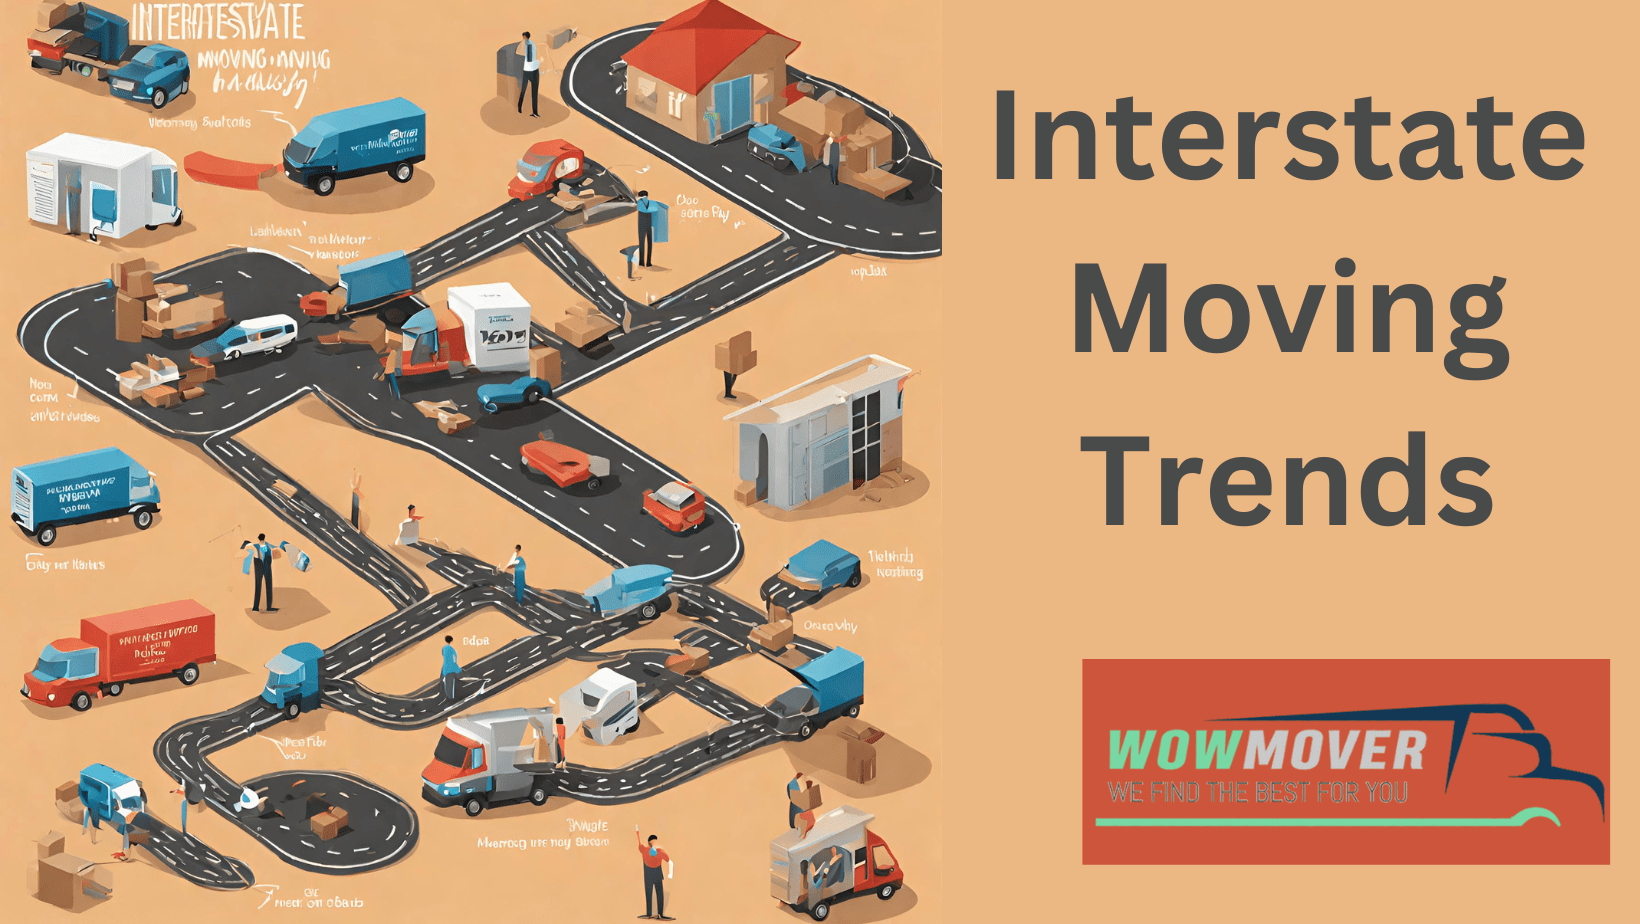 Interstate Moving Trends: What’s Changing in the Industry